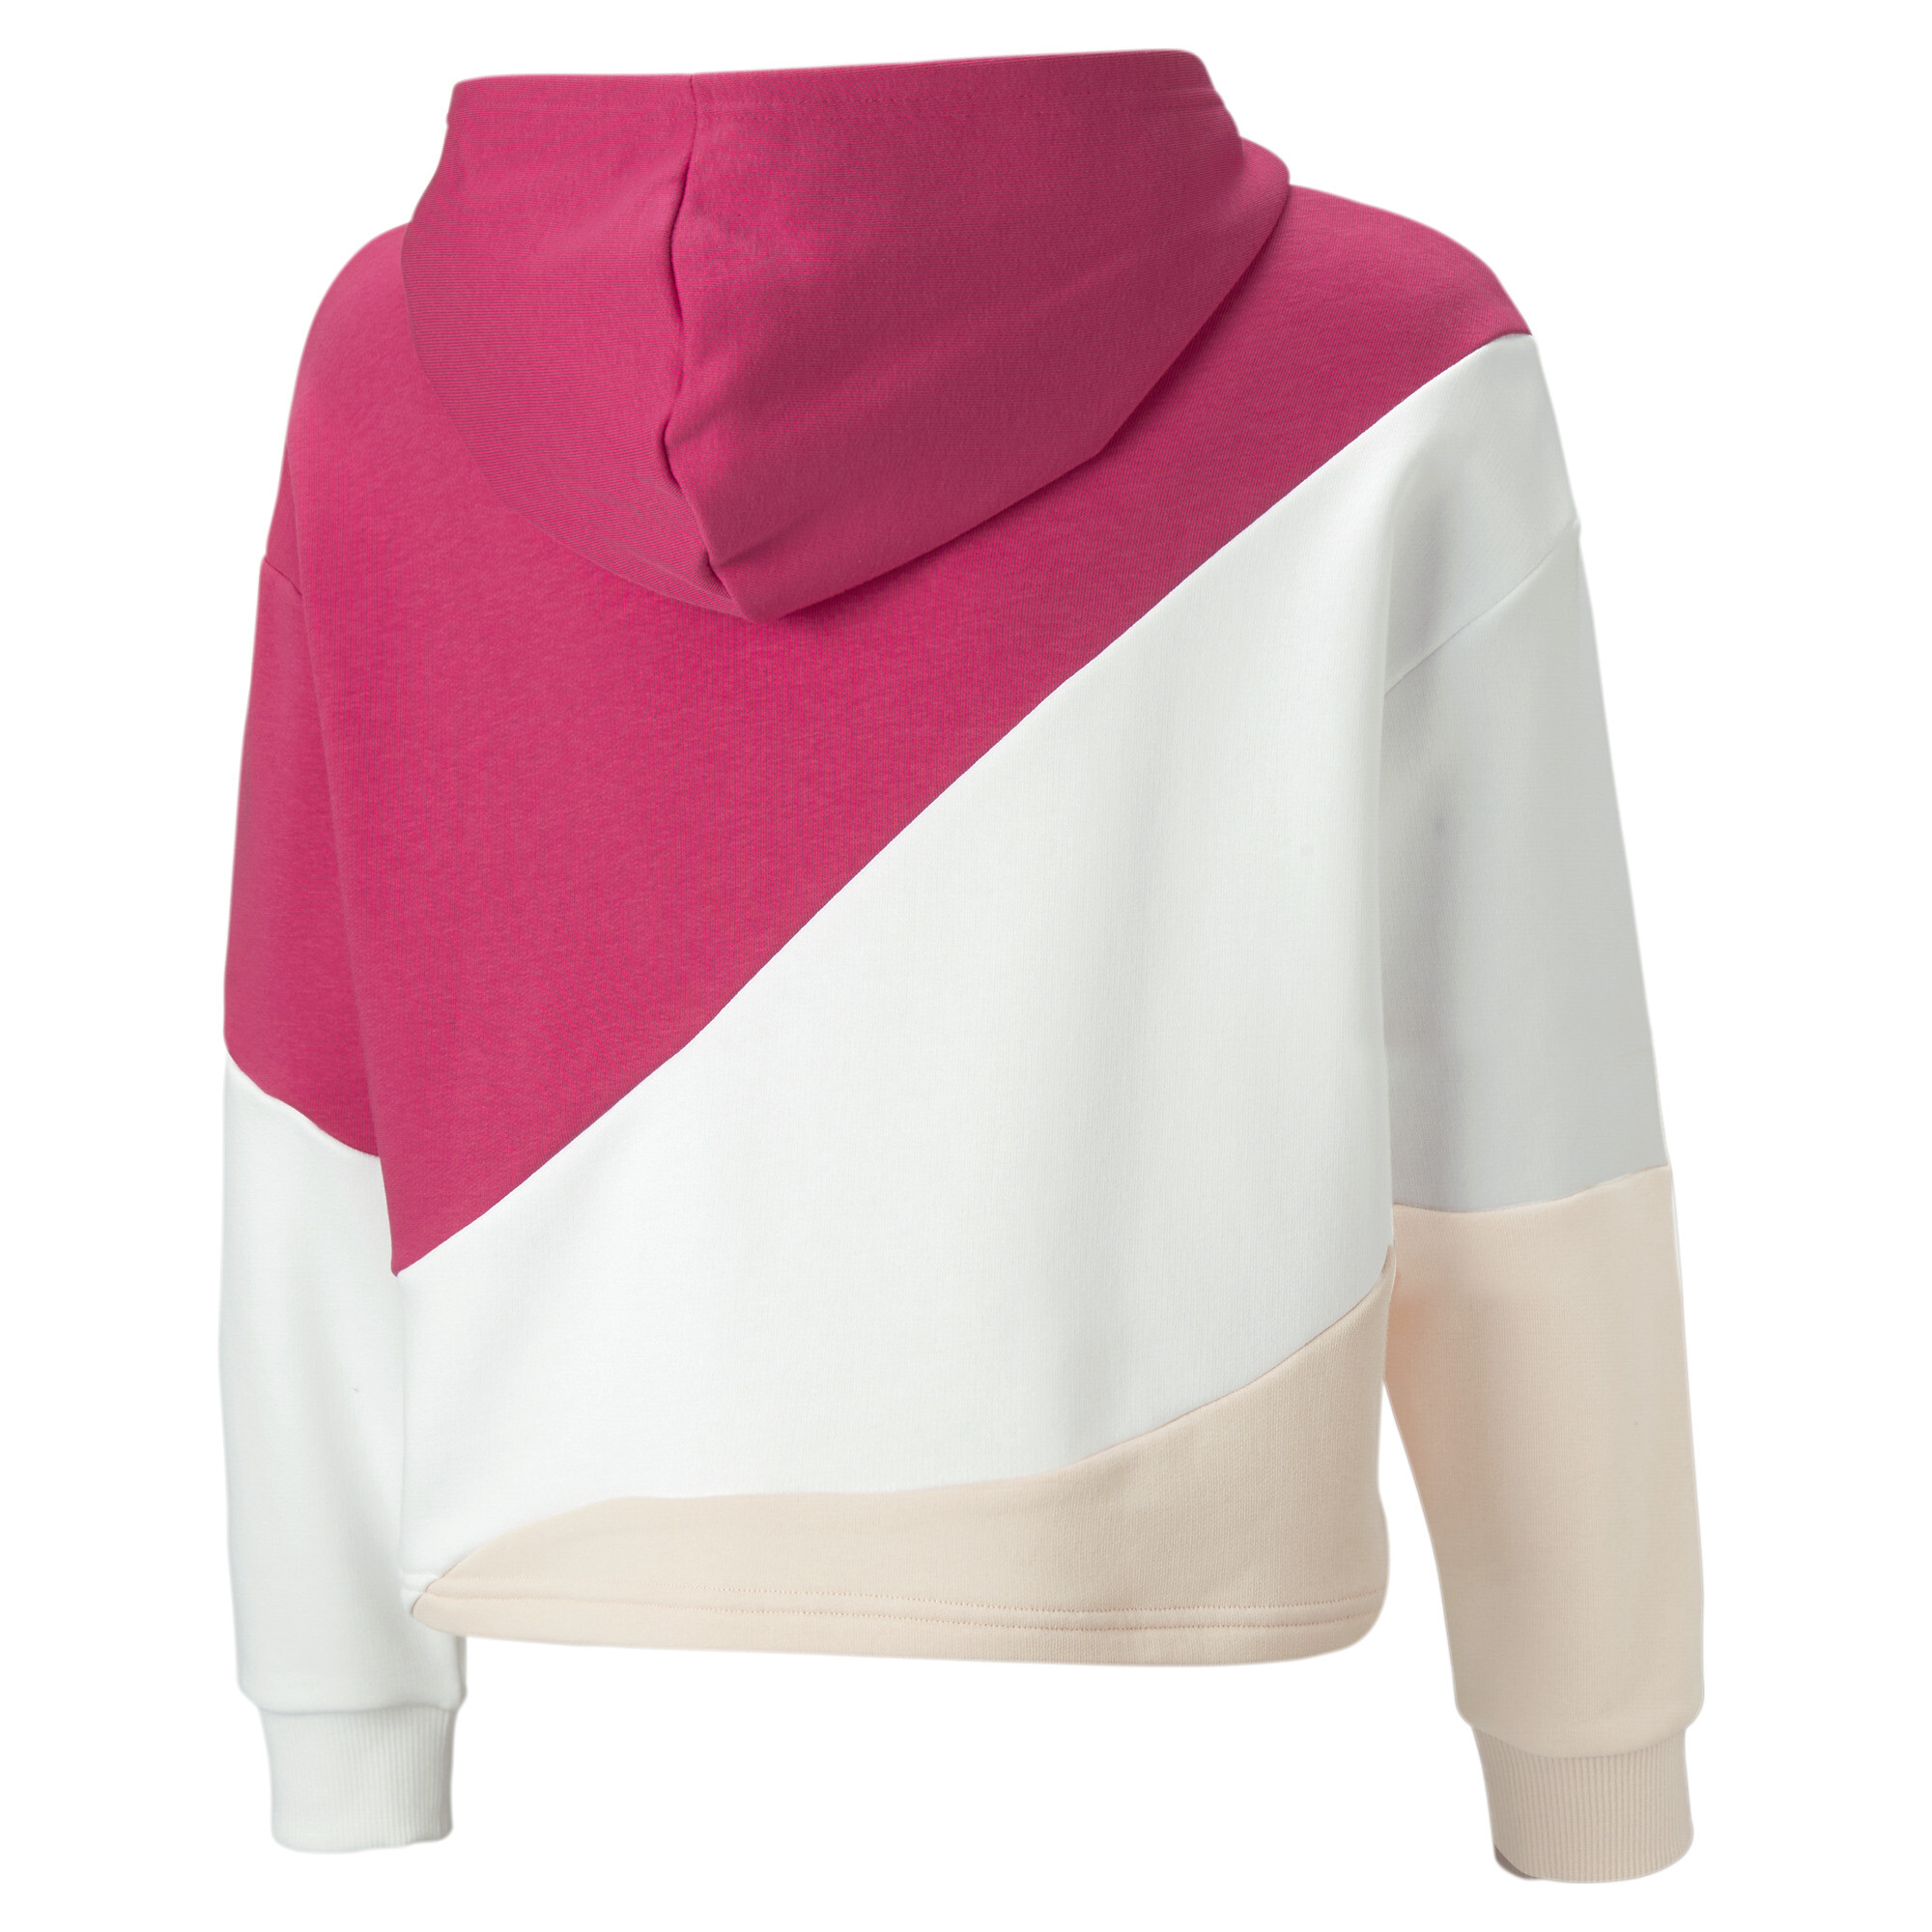 PUMA Power Cat Hoodie In Pink, Size 13-14 Youth